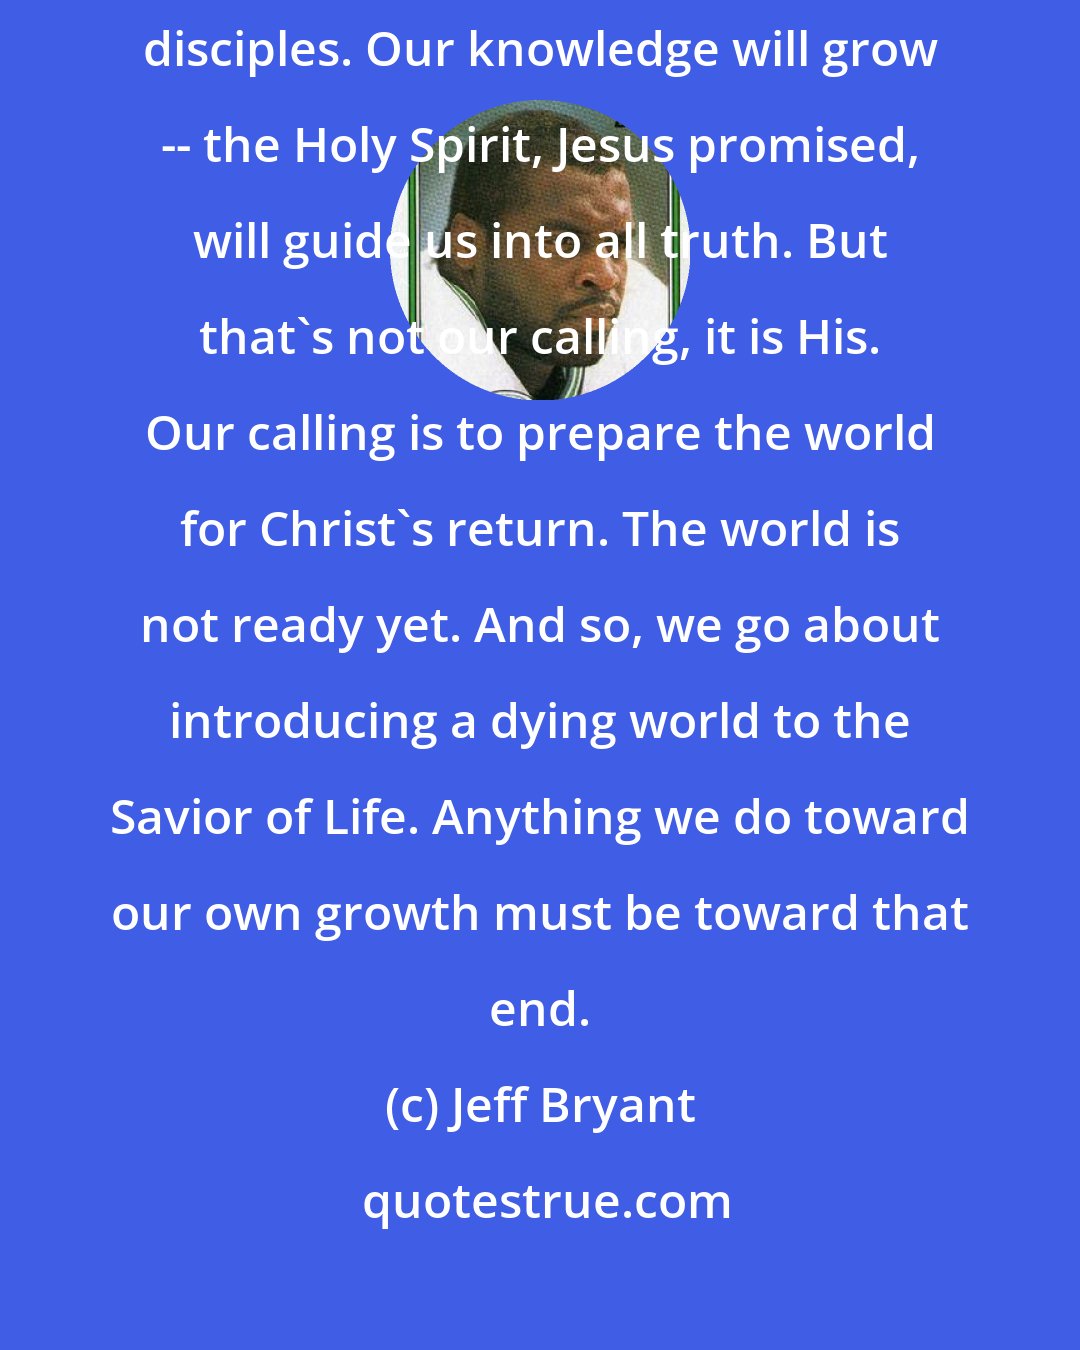 Jeff Bryant: Our deepest calling is not to grow in our knowledge of God. It is to make disciples. Our knowledge will grow -- the Holy Spirit, Jesus promised, will guide us into all truth. But that's not our calling, it is His. Our calling is to prepare the world for Christ's return. The world is not ready yet. And so, we go about introducing a dying world to the Savior of Life. Anything we do toward our own growth must be toward that end.